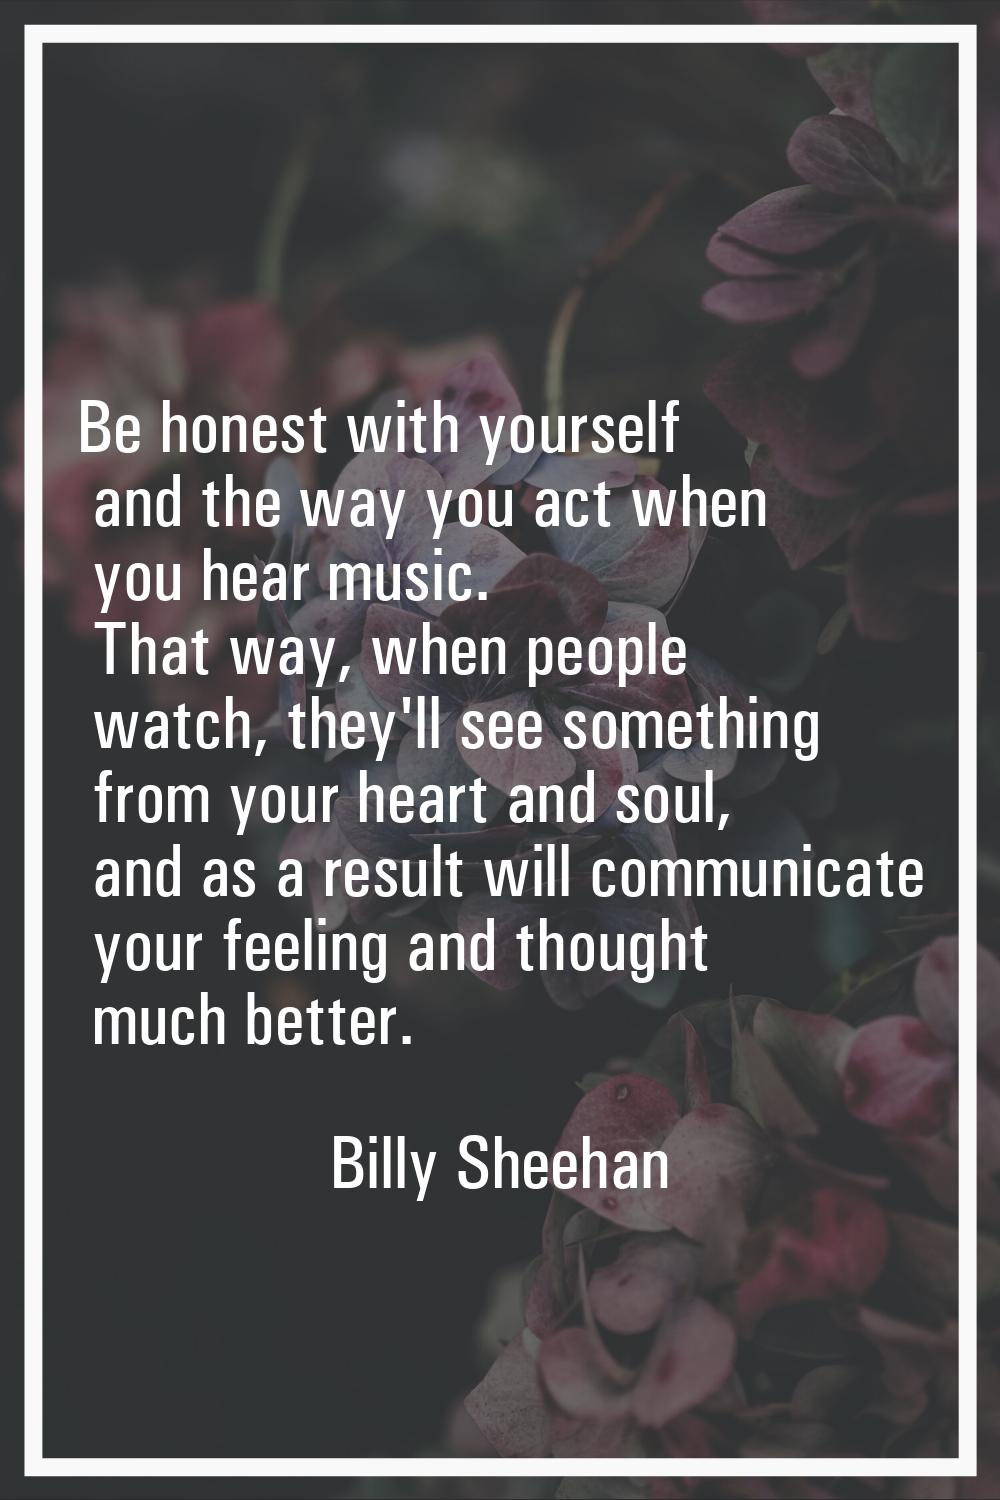 Be honest with yourself and the way you act when you hear music. That way, when people watch, they'